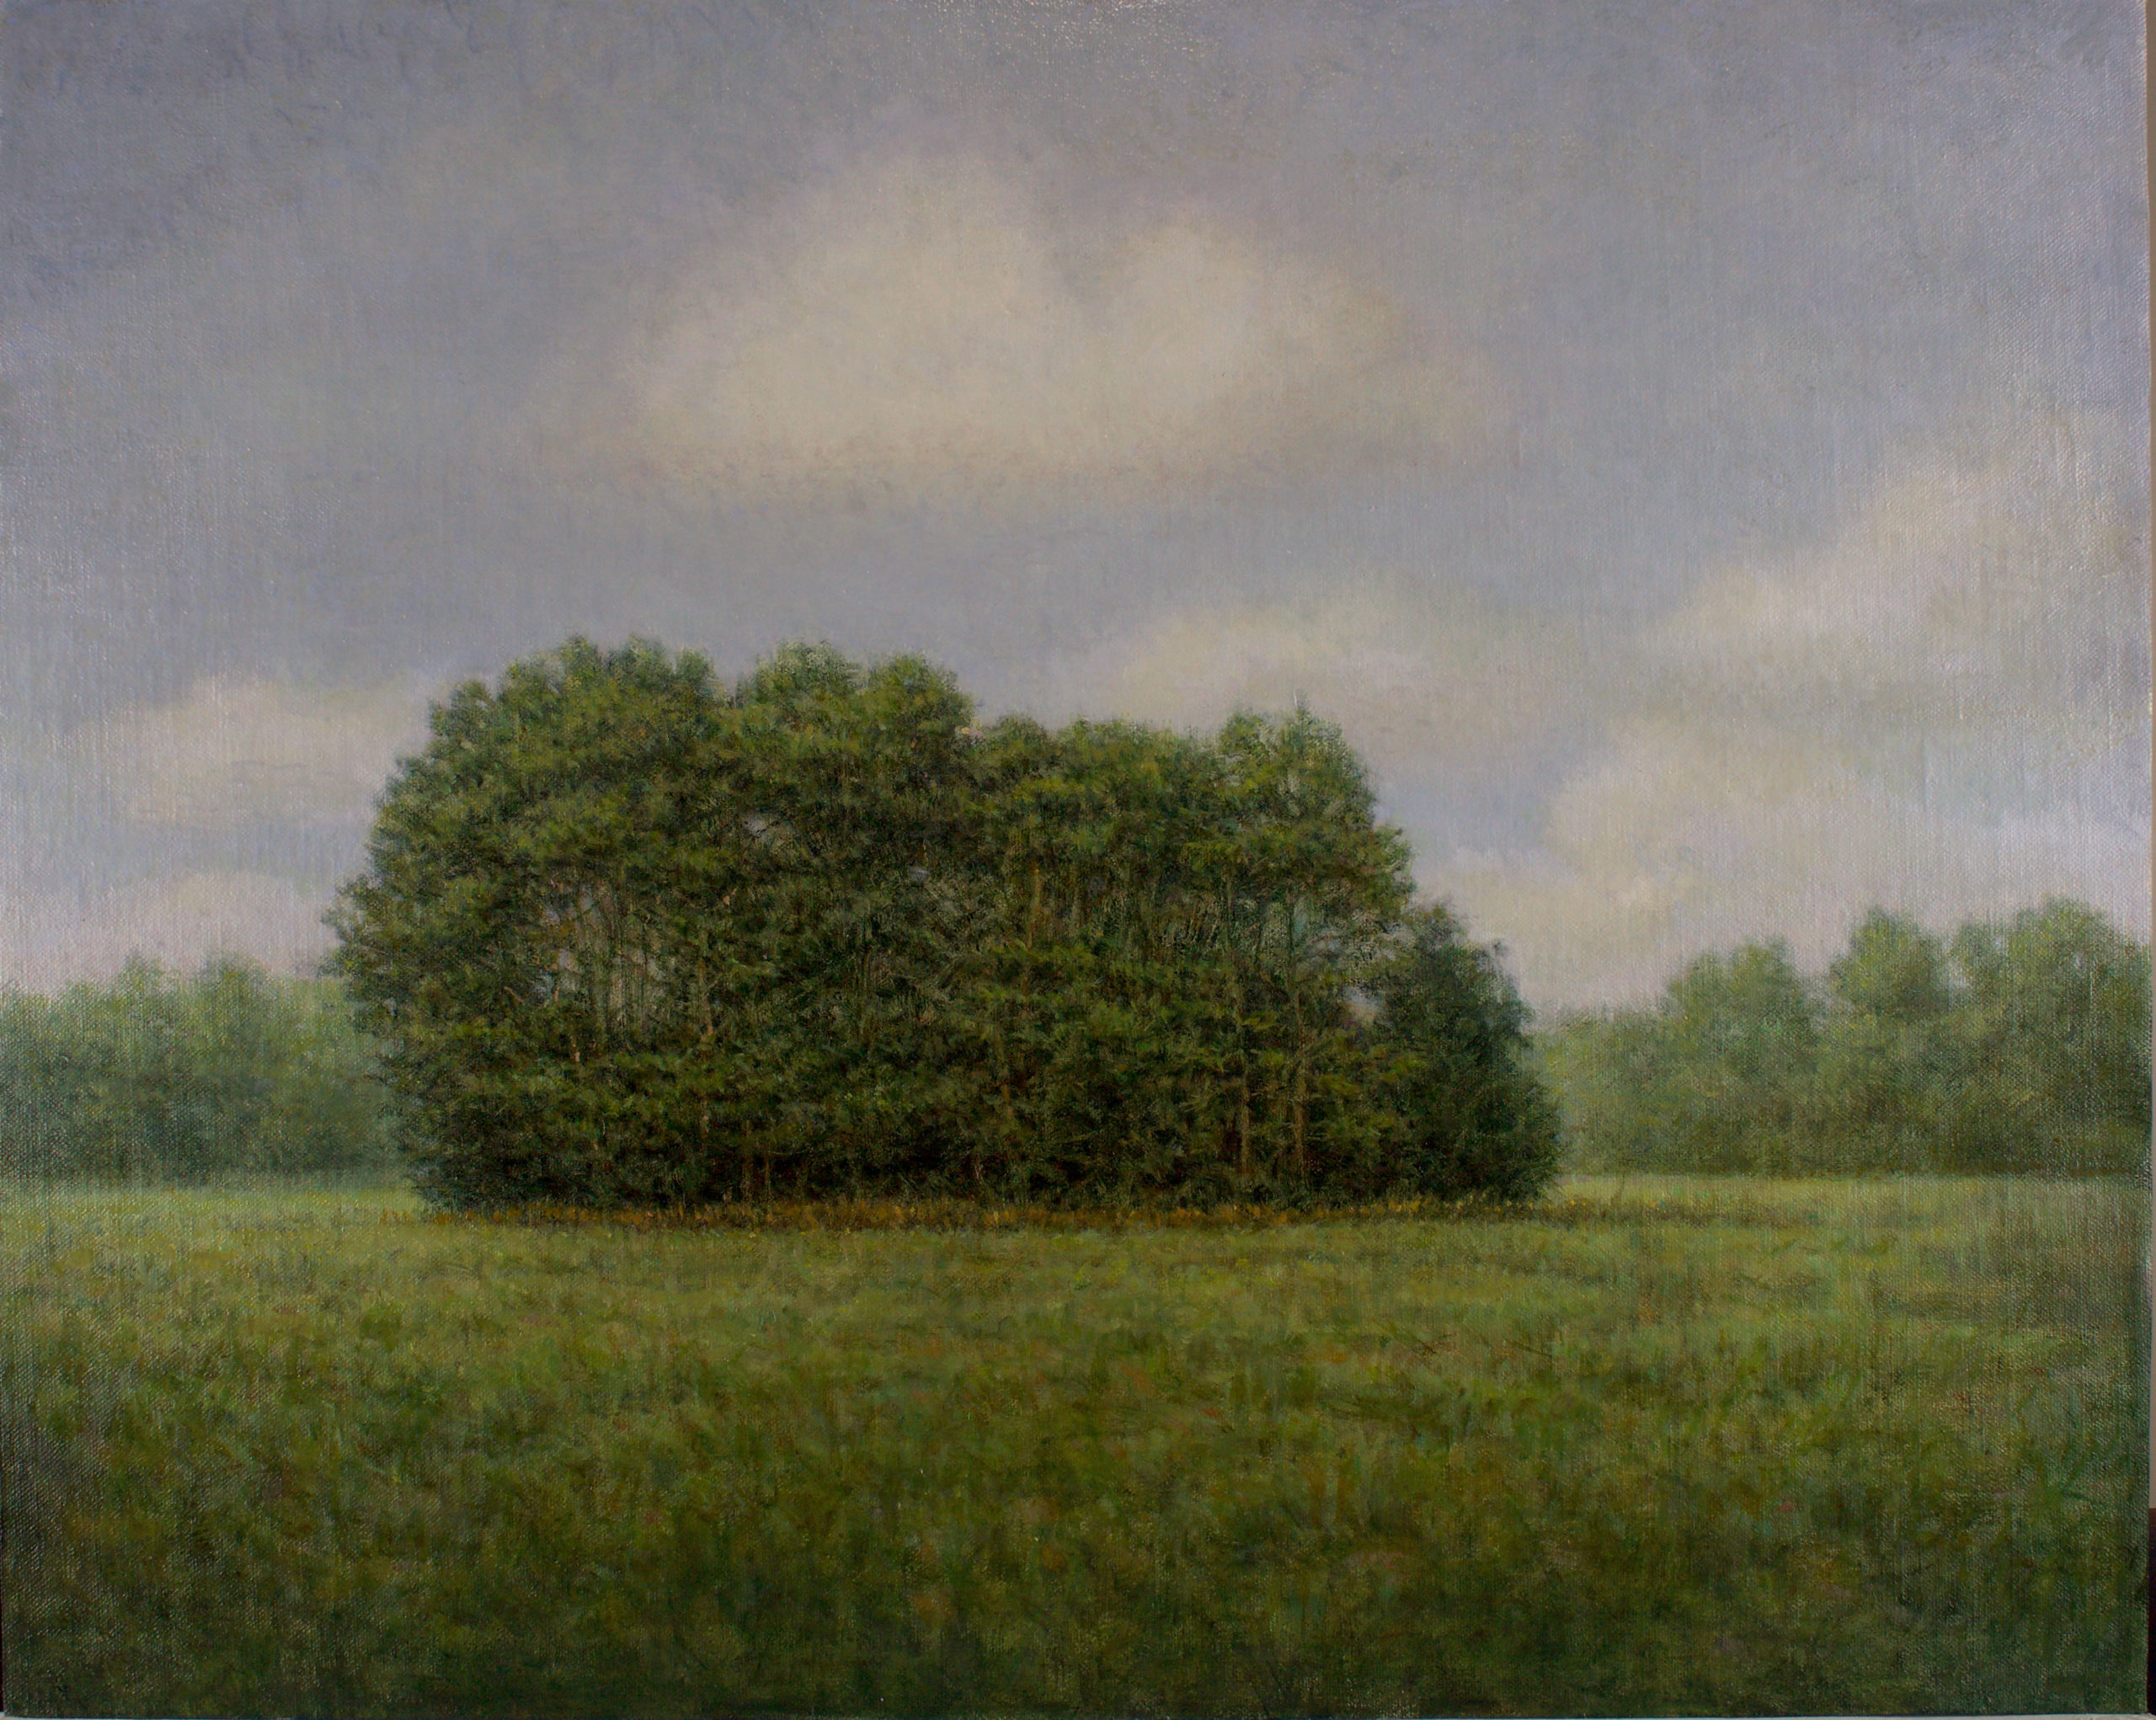 The Cospe by Gerry O’Neill. oil on canvas 16 x 20 at Craven Allen Gallery